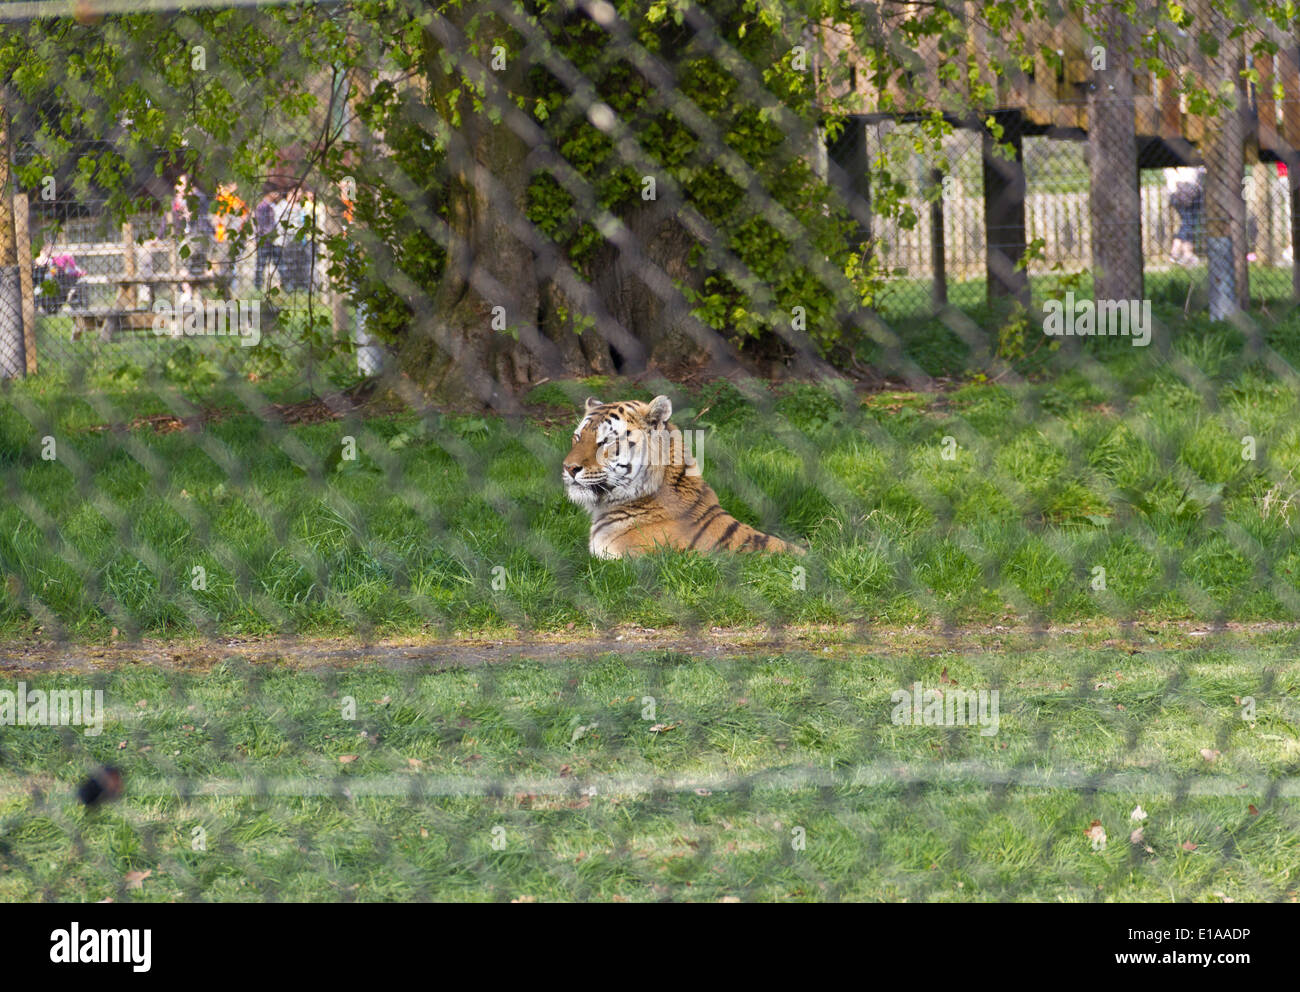 Royal Bengal Tiger in its enclosure at the Blair Drummond Safari park, this is an open park where one can drive through Stock Photo